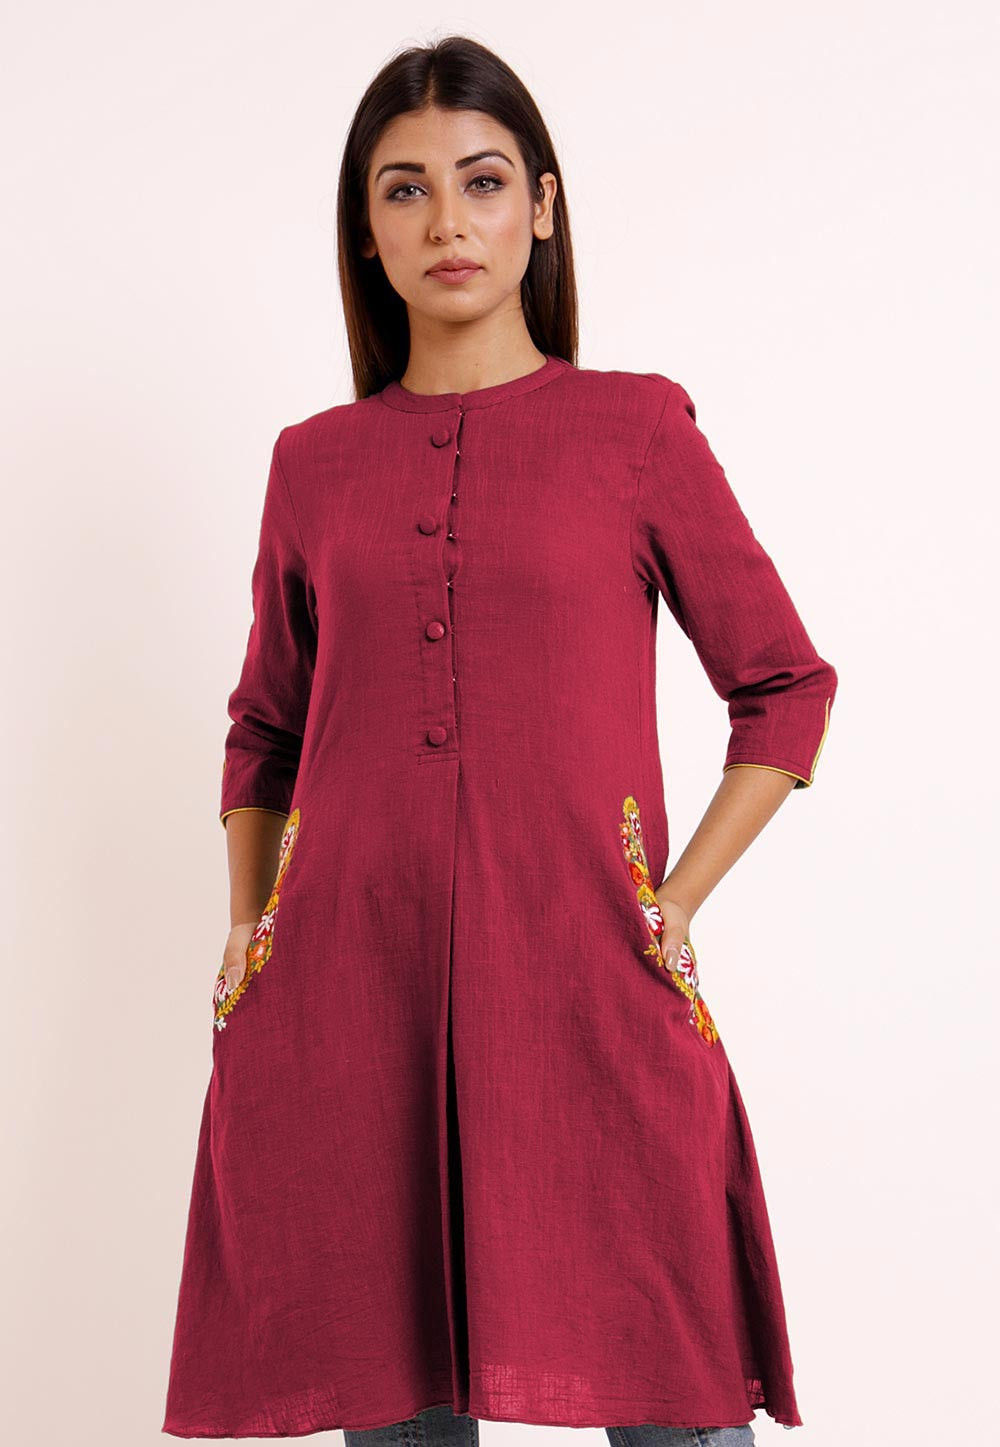 Discover more than 78 ladies kurti with pockets